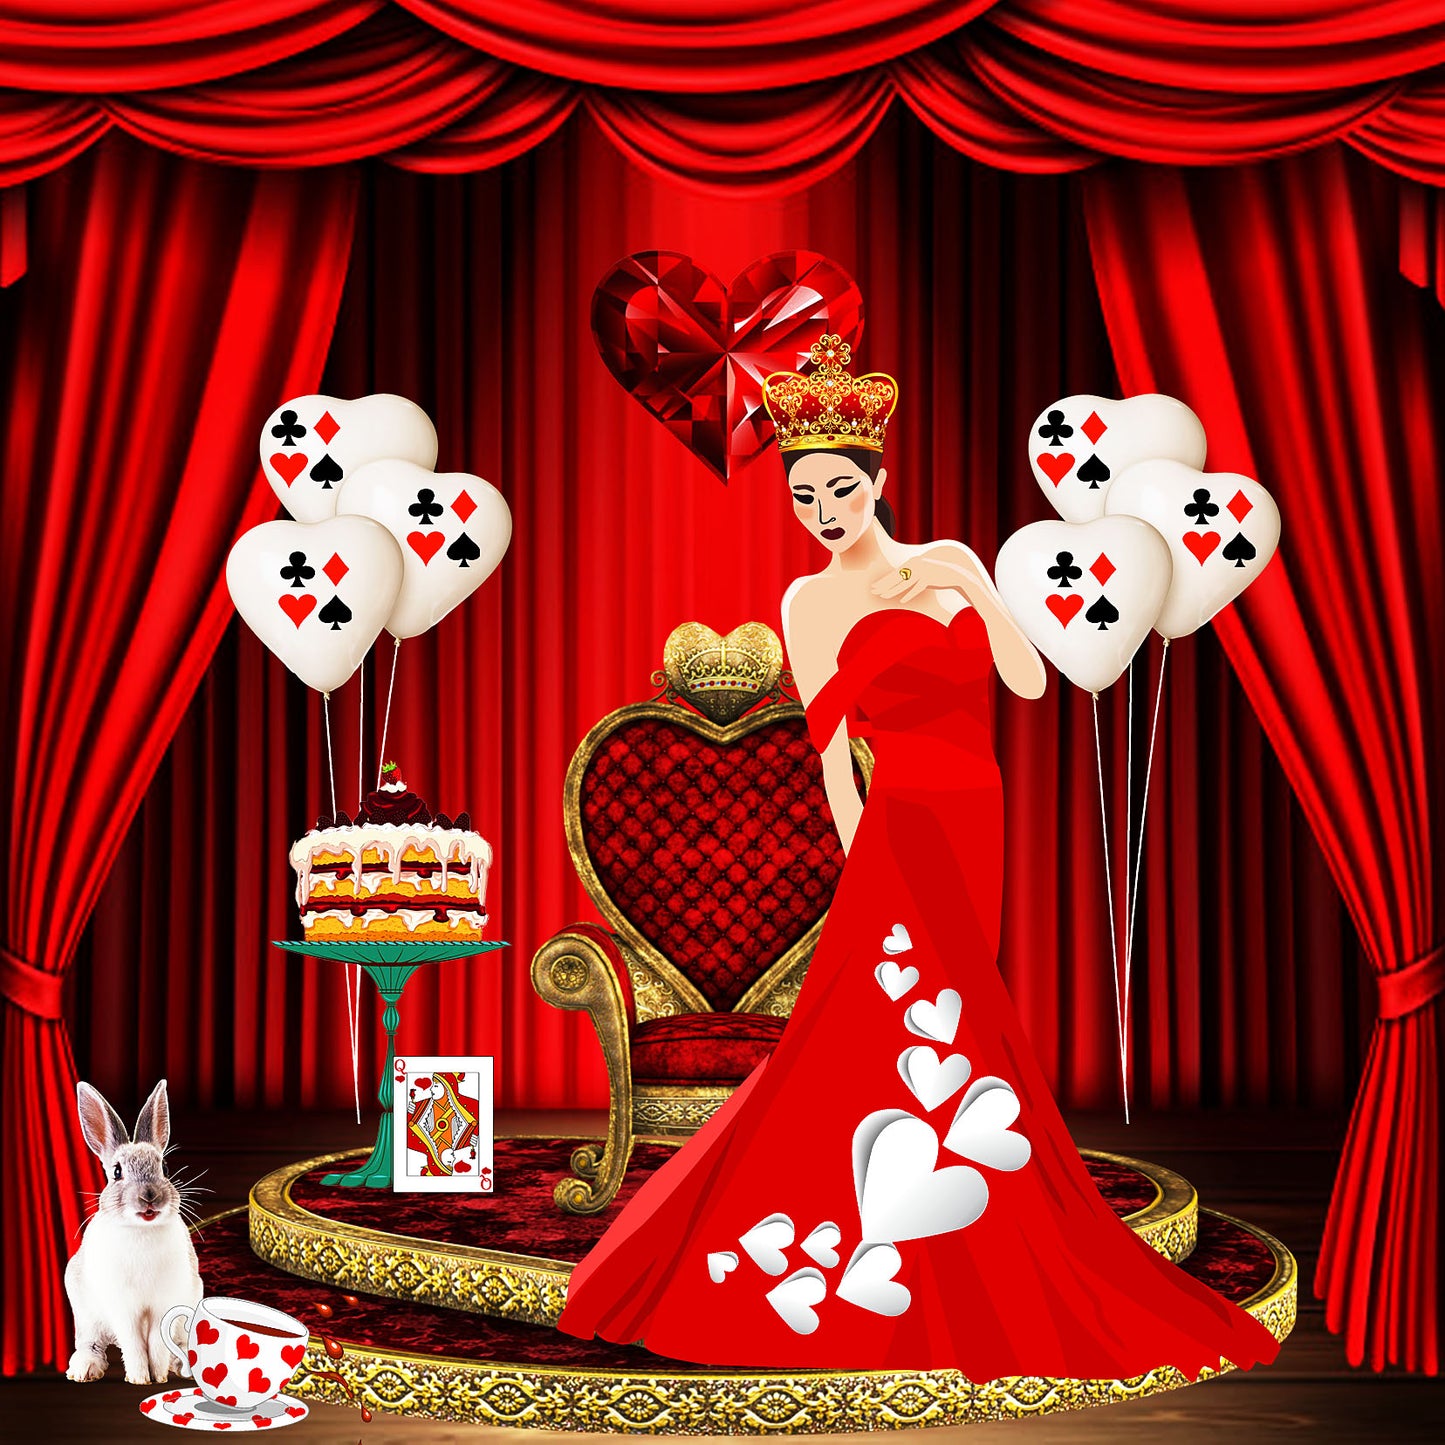 Queen Of Hearts Fragrance Oil | Truly Personal | Candles, Wax Melts, Soap, Bath Bombs